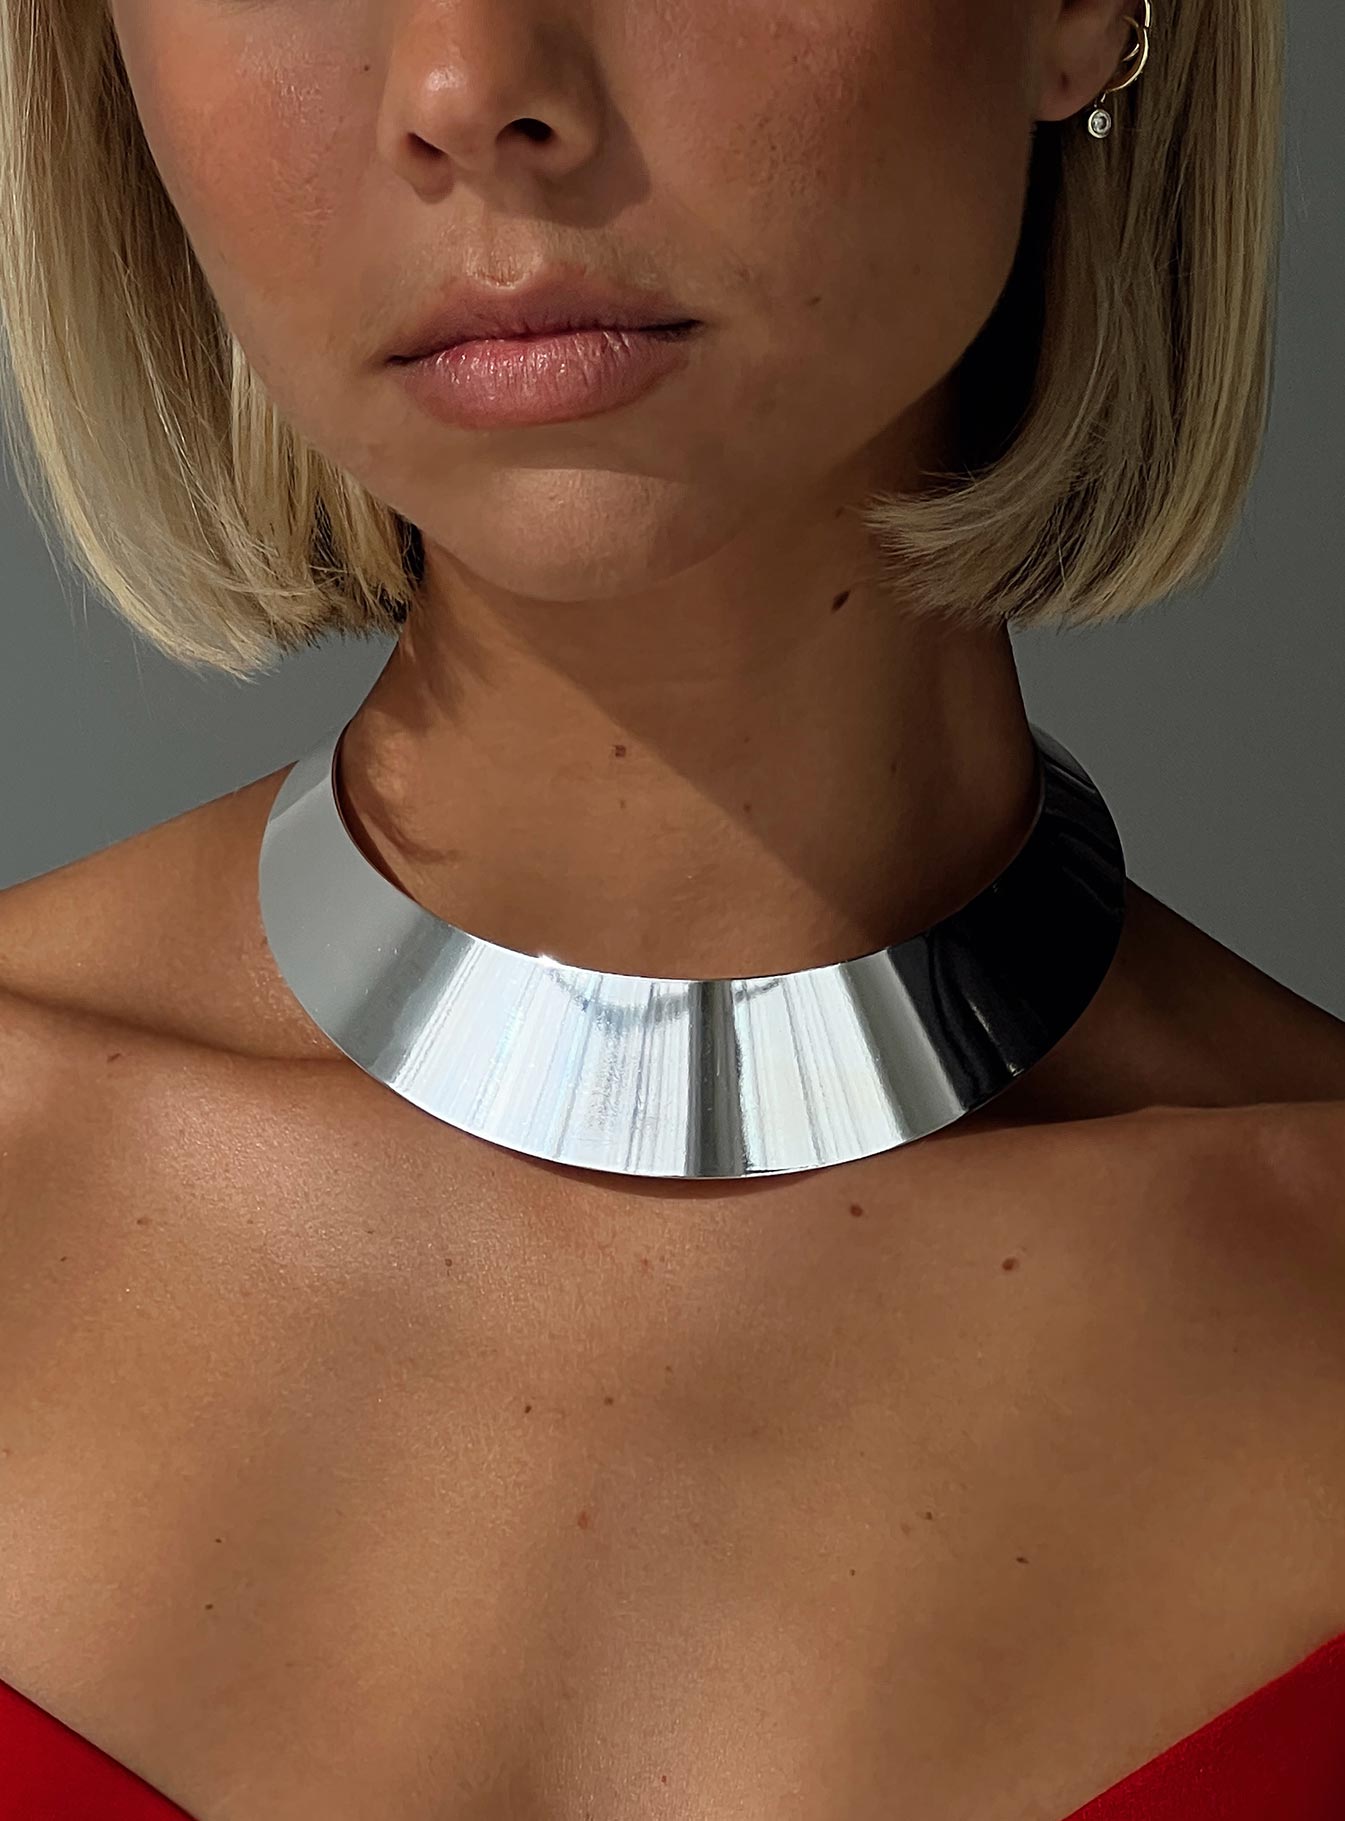 Etched Chocker / Neck Cuff / Necklace / Neck Band | Chocker neck, Chocker,  Cuff